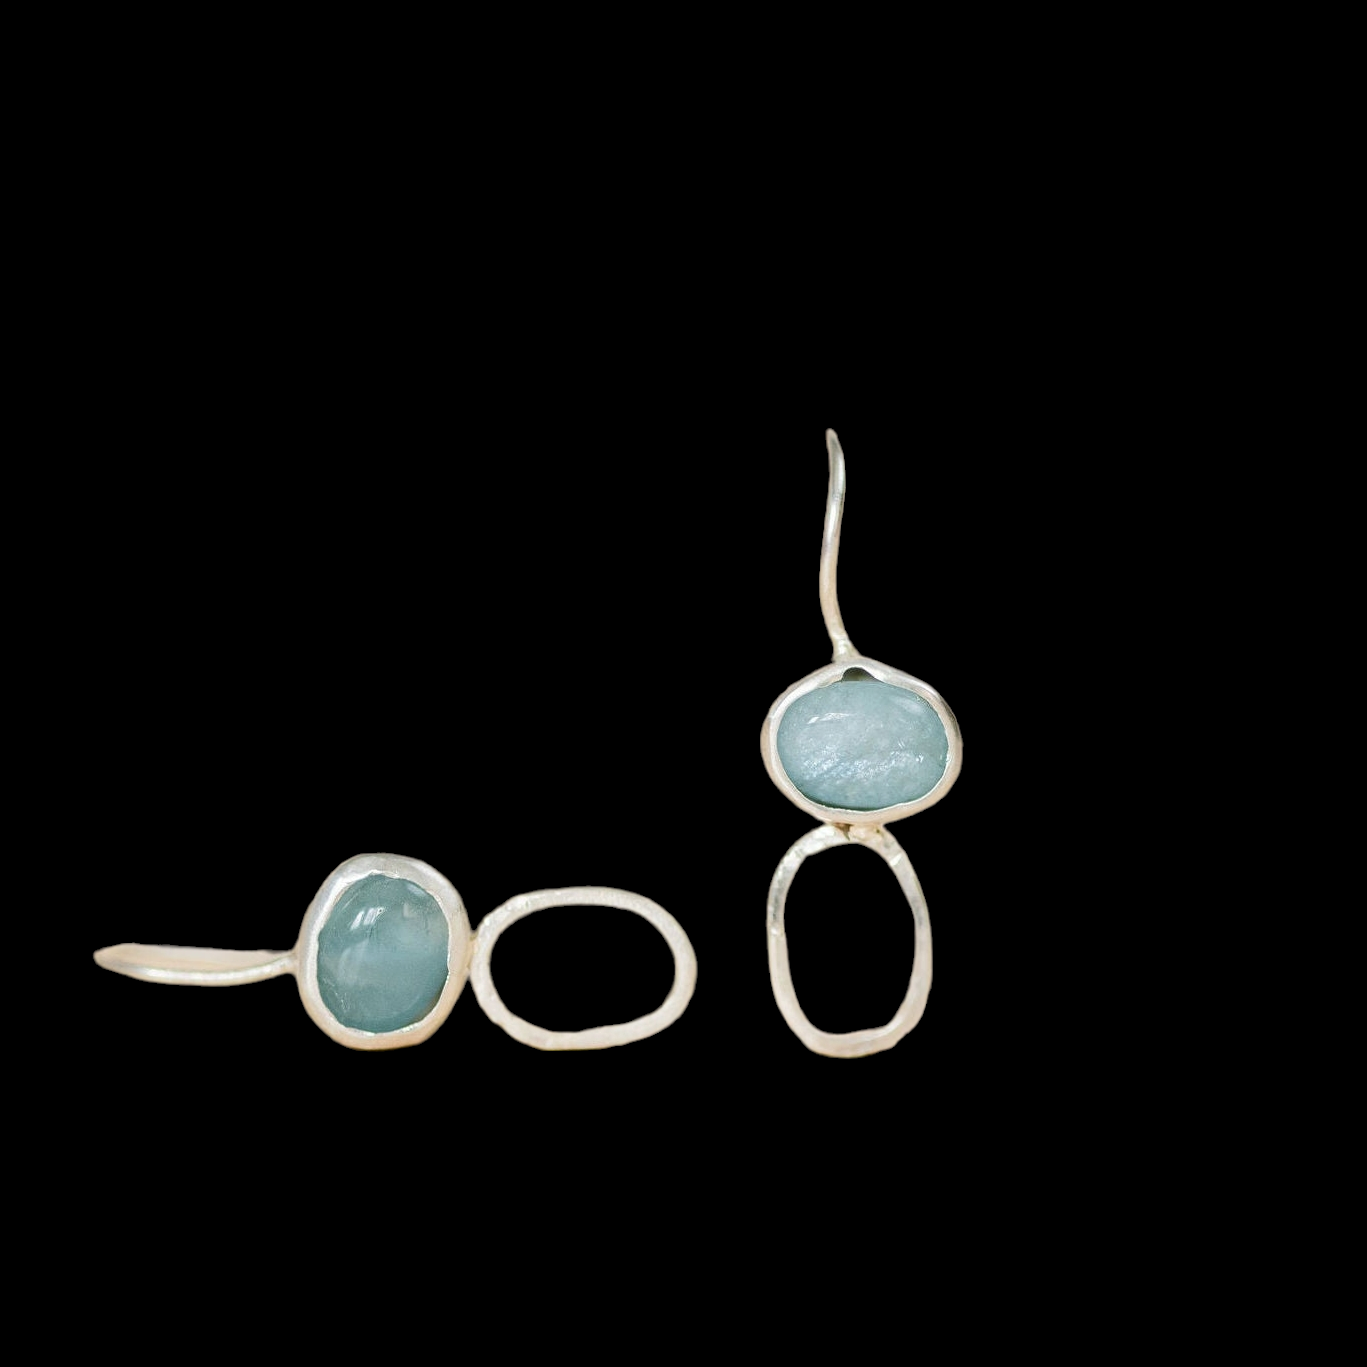 Sterling Silver Modernist Earrings with Aquamarine